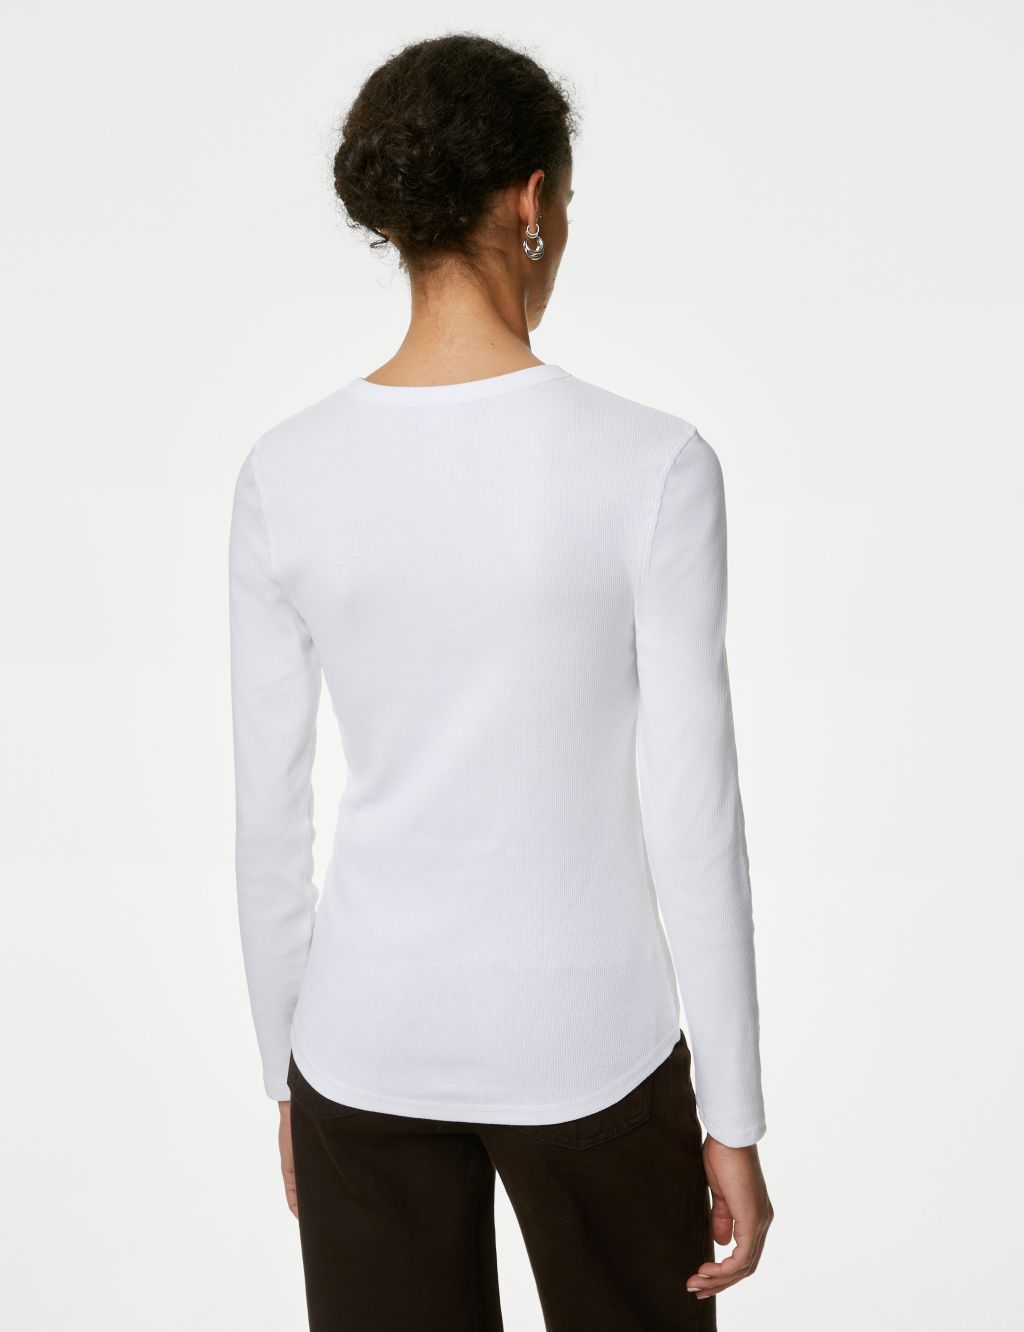 Cotton Rich Ribbed Henley Top image 5